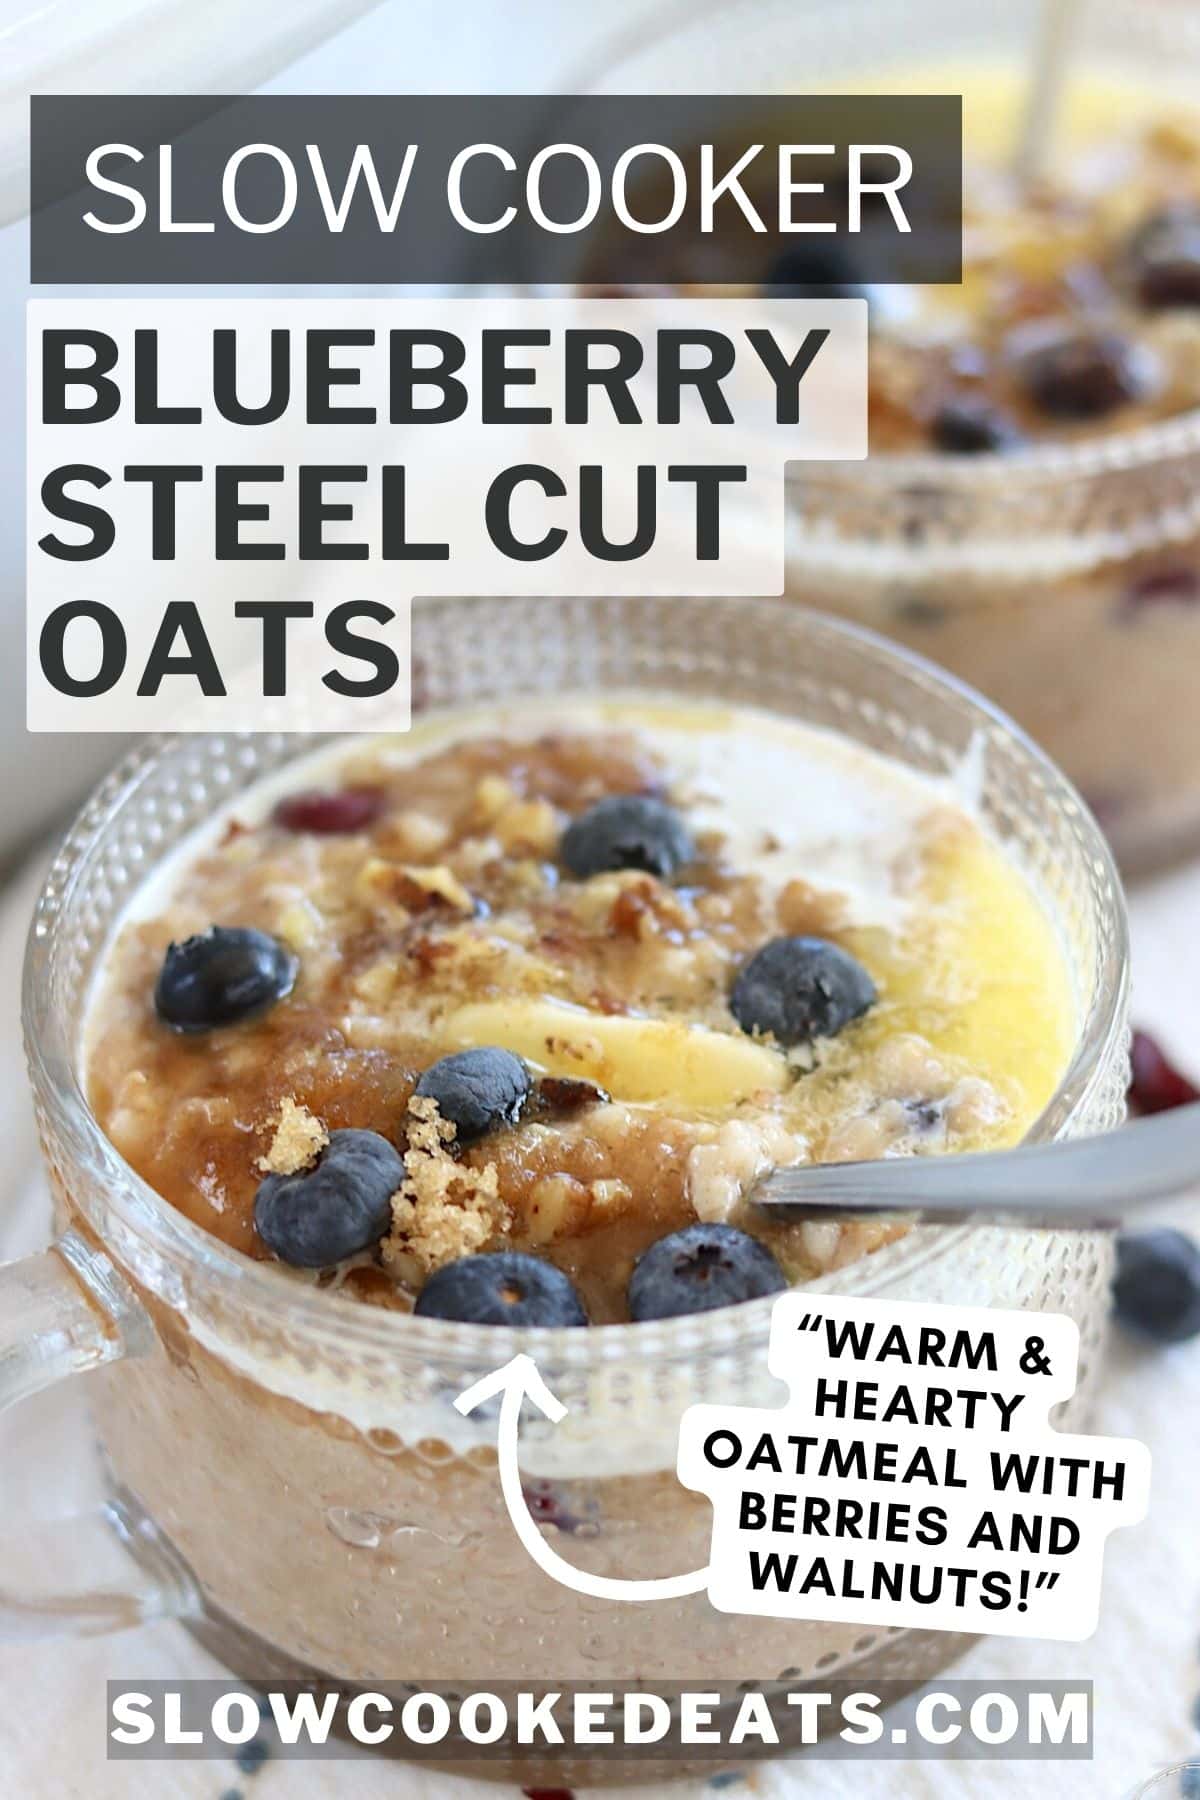 Slow cooker steel cut oats with fresh blueberries in a clear glass bowl.